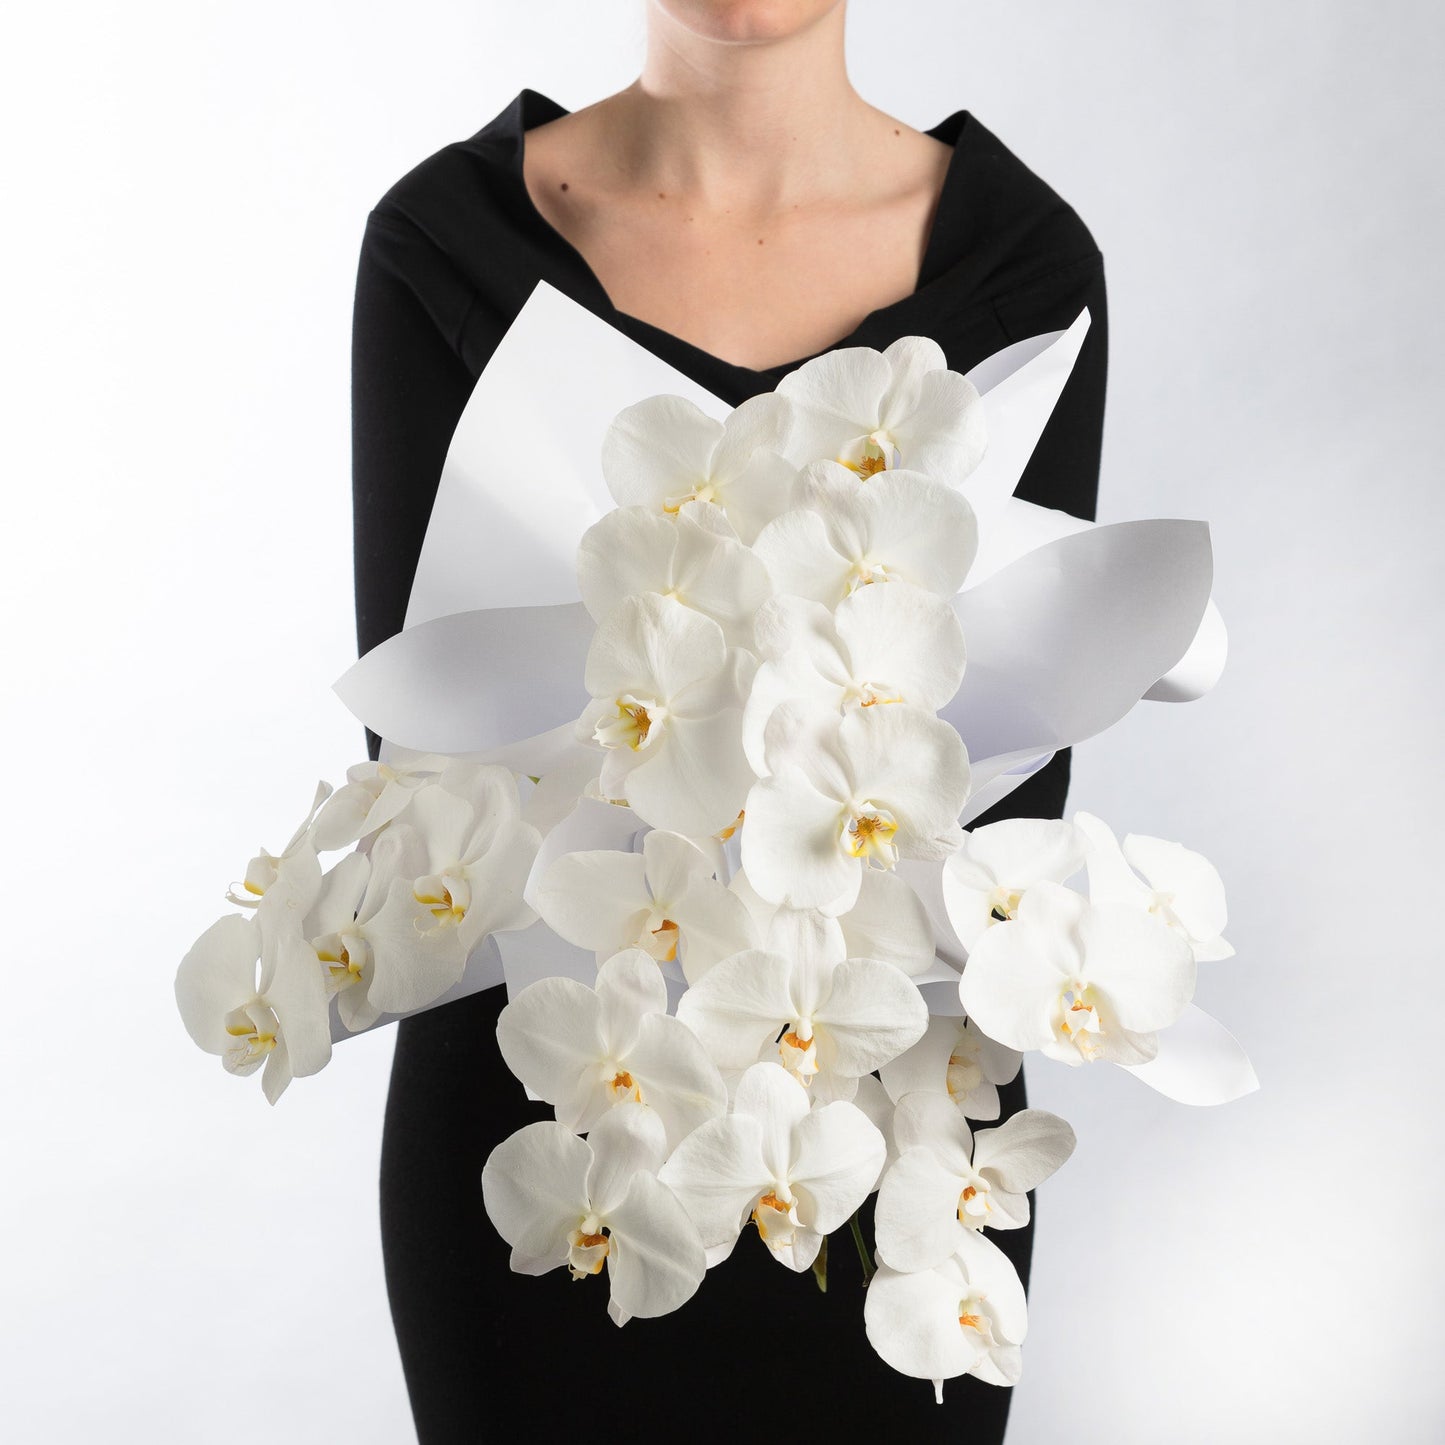 Woman wearing a black dress, holding a bouquet of white phalaenopsis orchids.